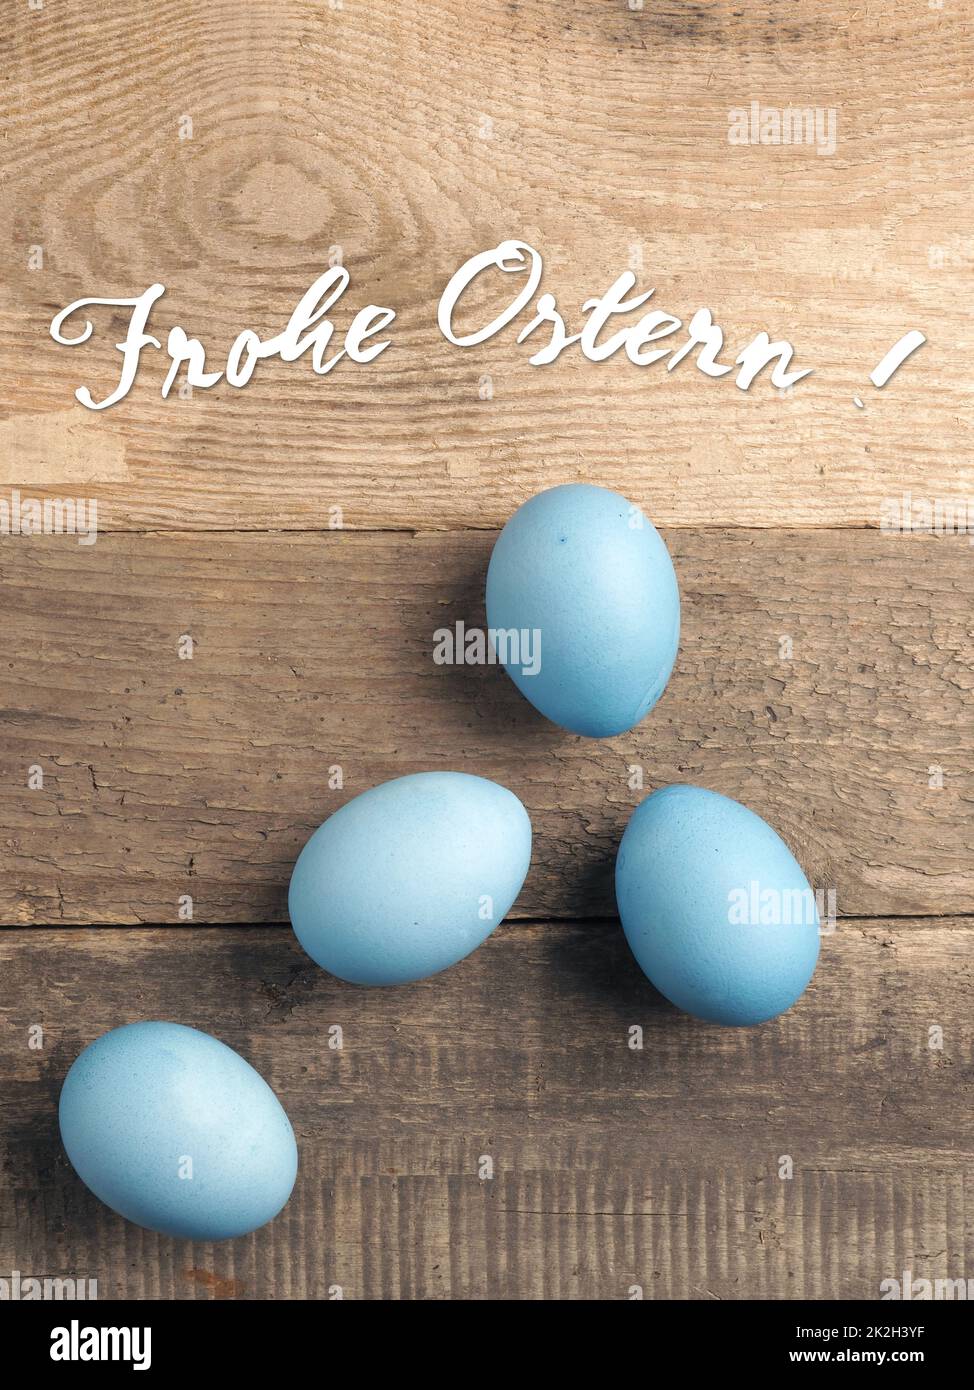 German Happy Easter with naturally blue colored organic eggs Stock Photo